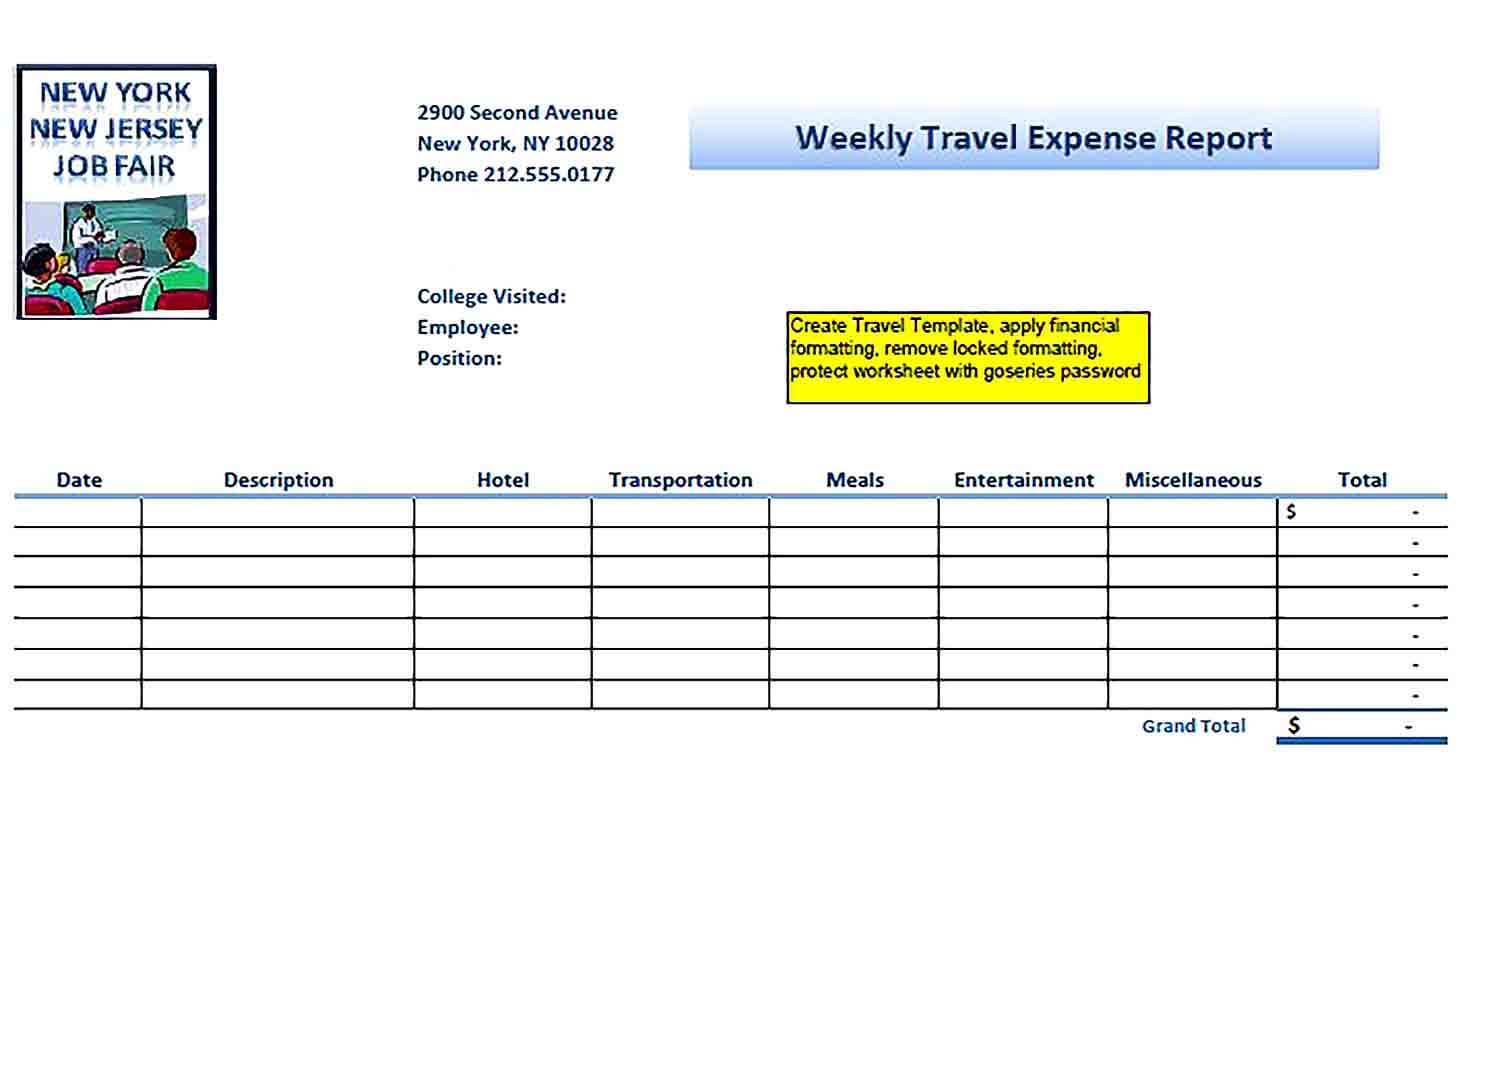 Sample Weekly Travel Expense Report